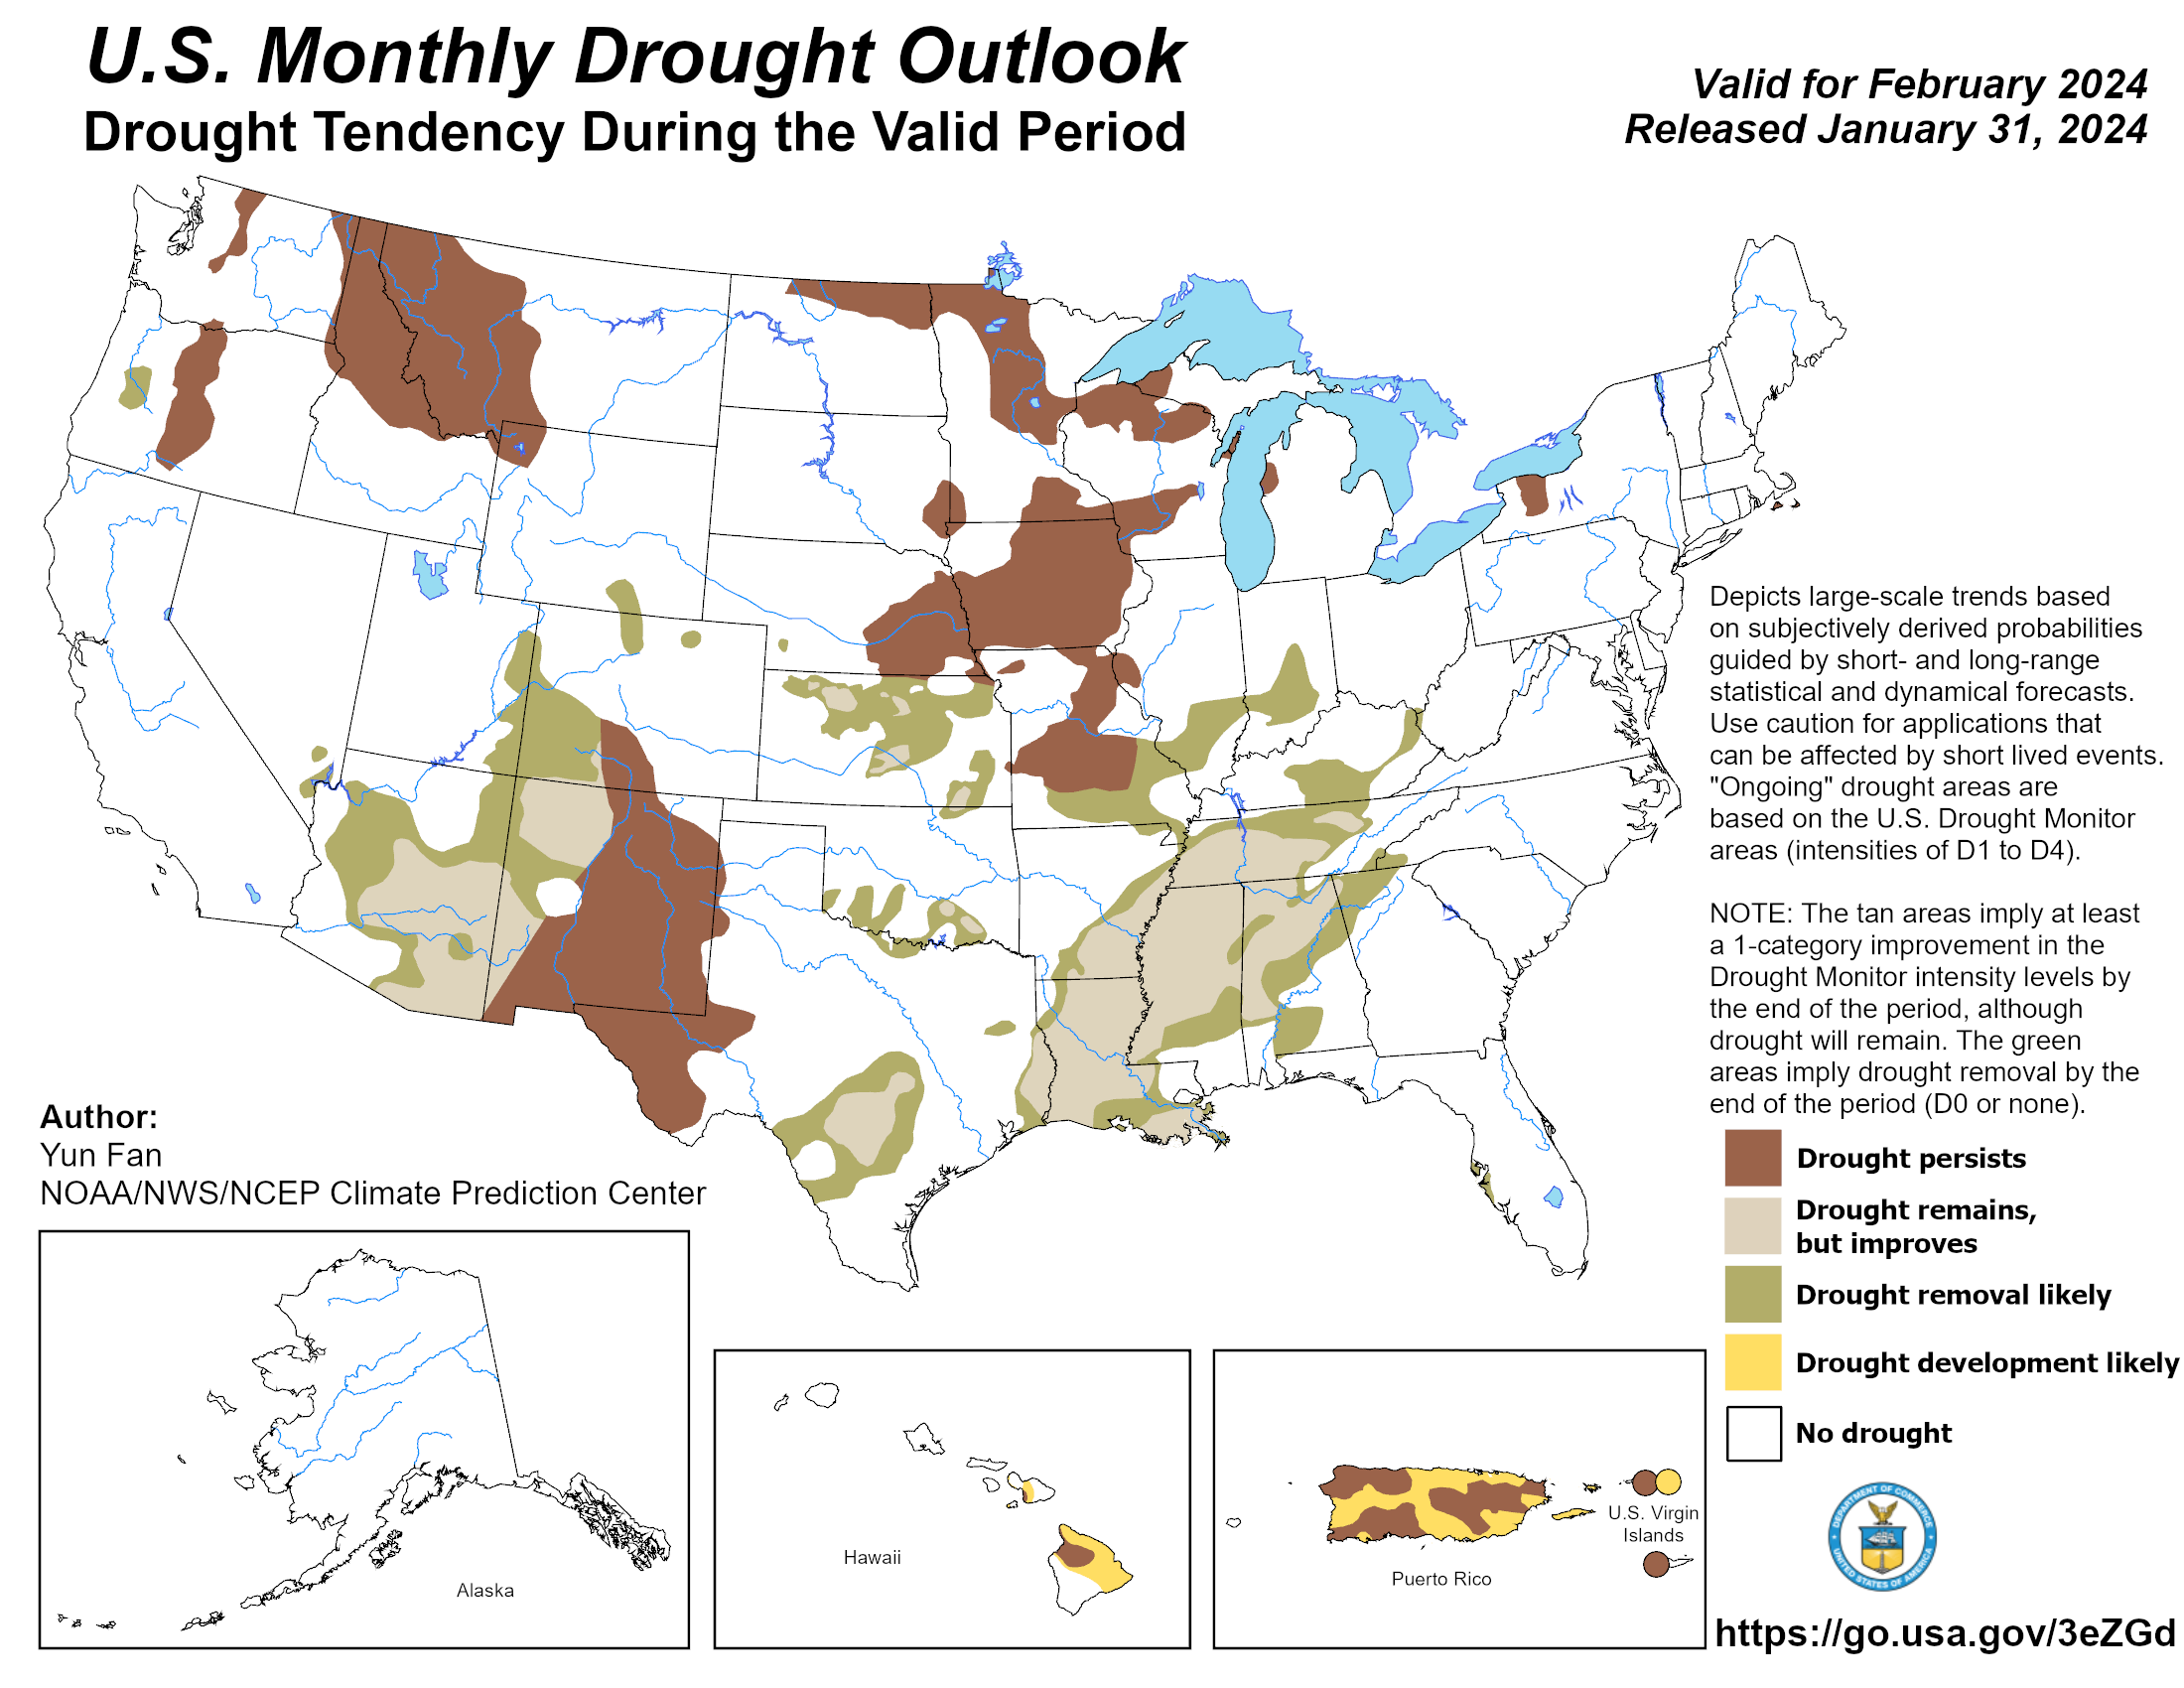 The U.S. Monthly Drought Outlook shows the majority of Oklahoma in no drought, with small areas of drought in southern Oklahoma shown as drought removal likely. Small pockets of drought in south-central Oklahoma are forecast remain but improve.